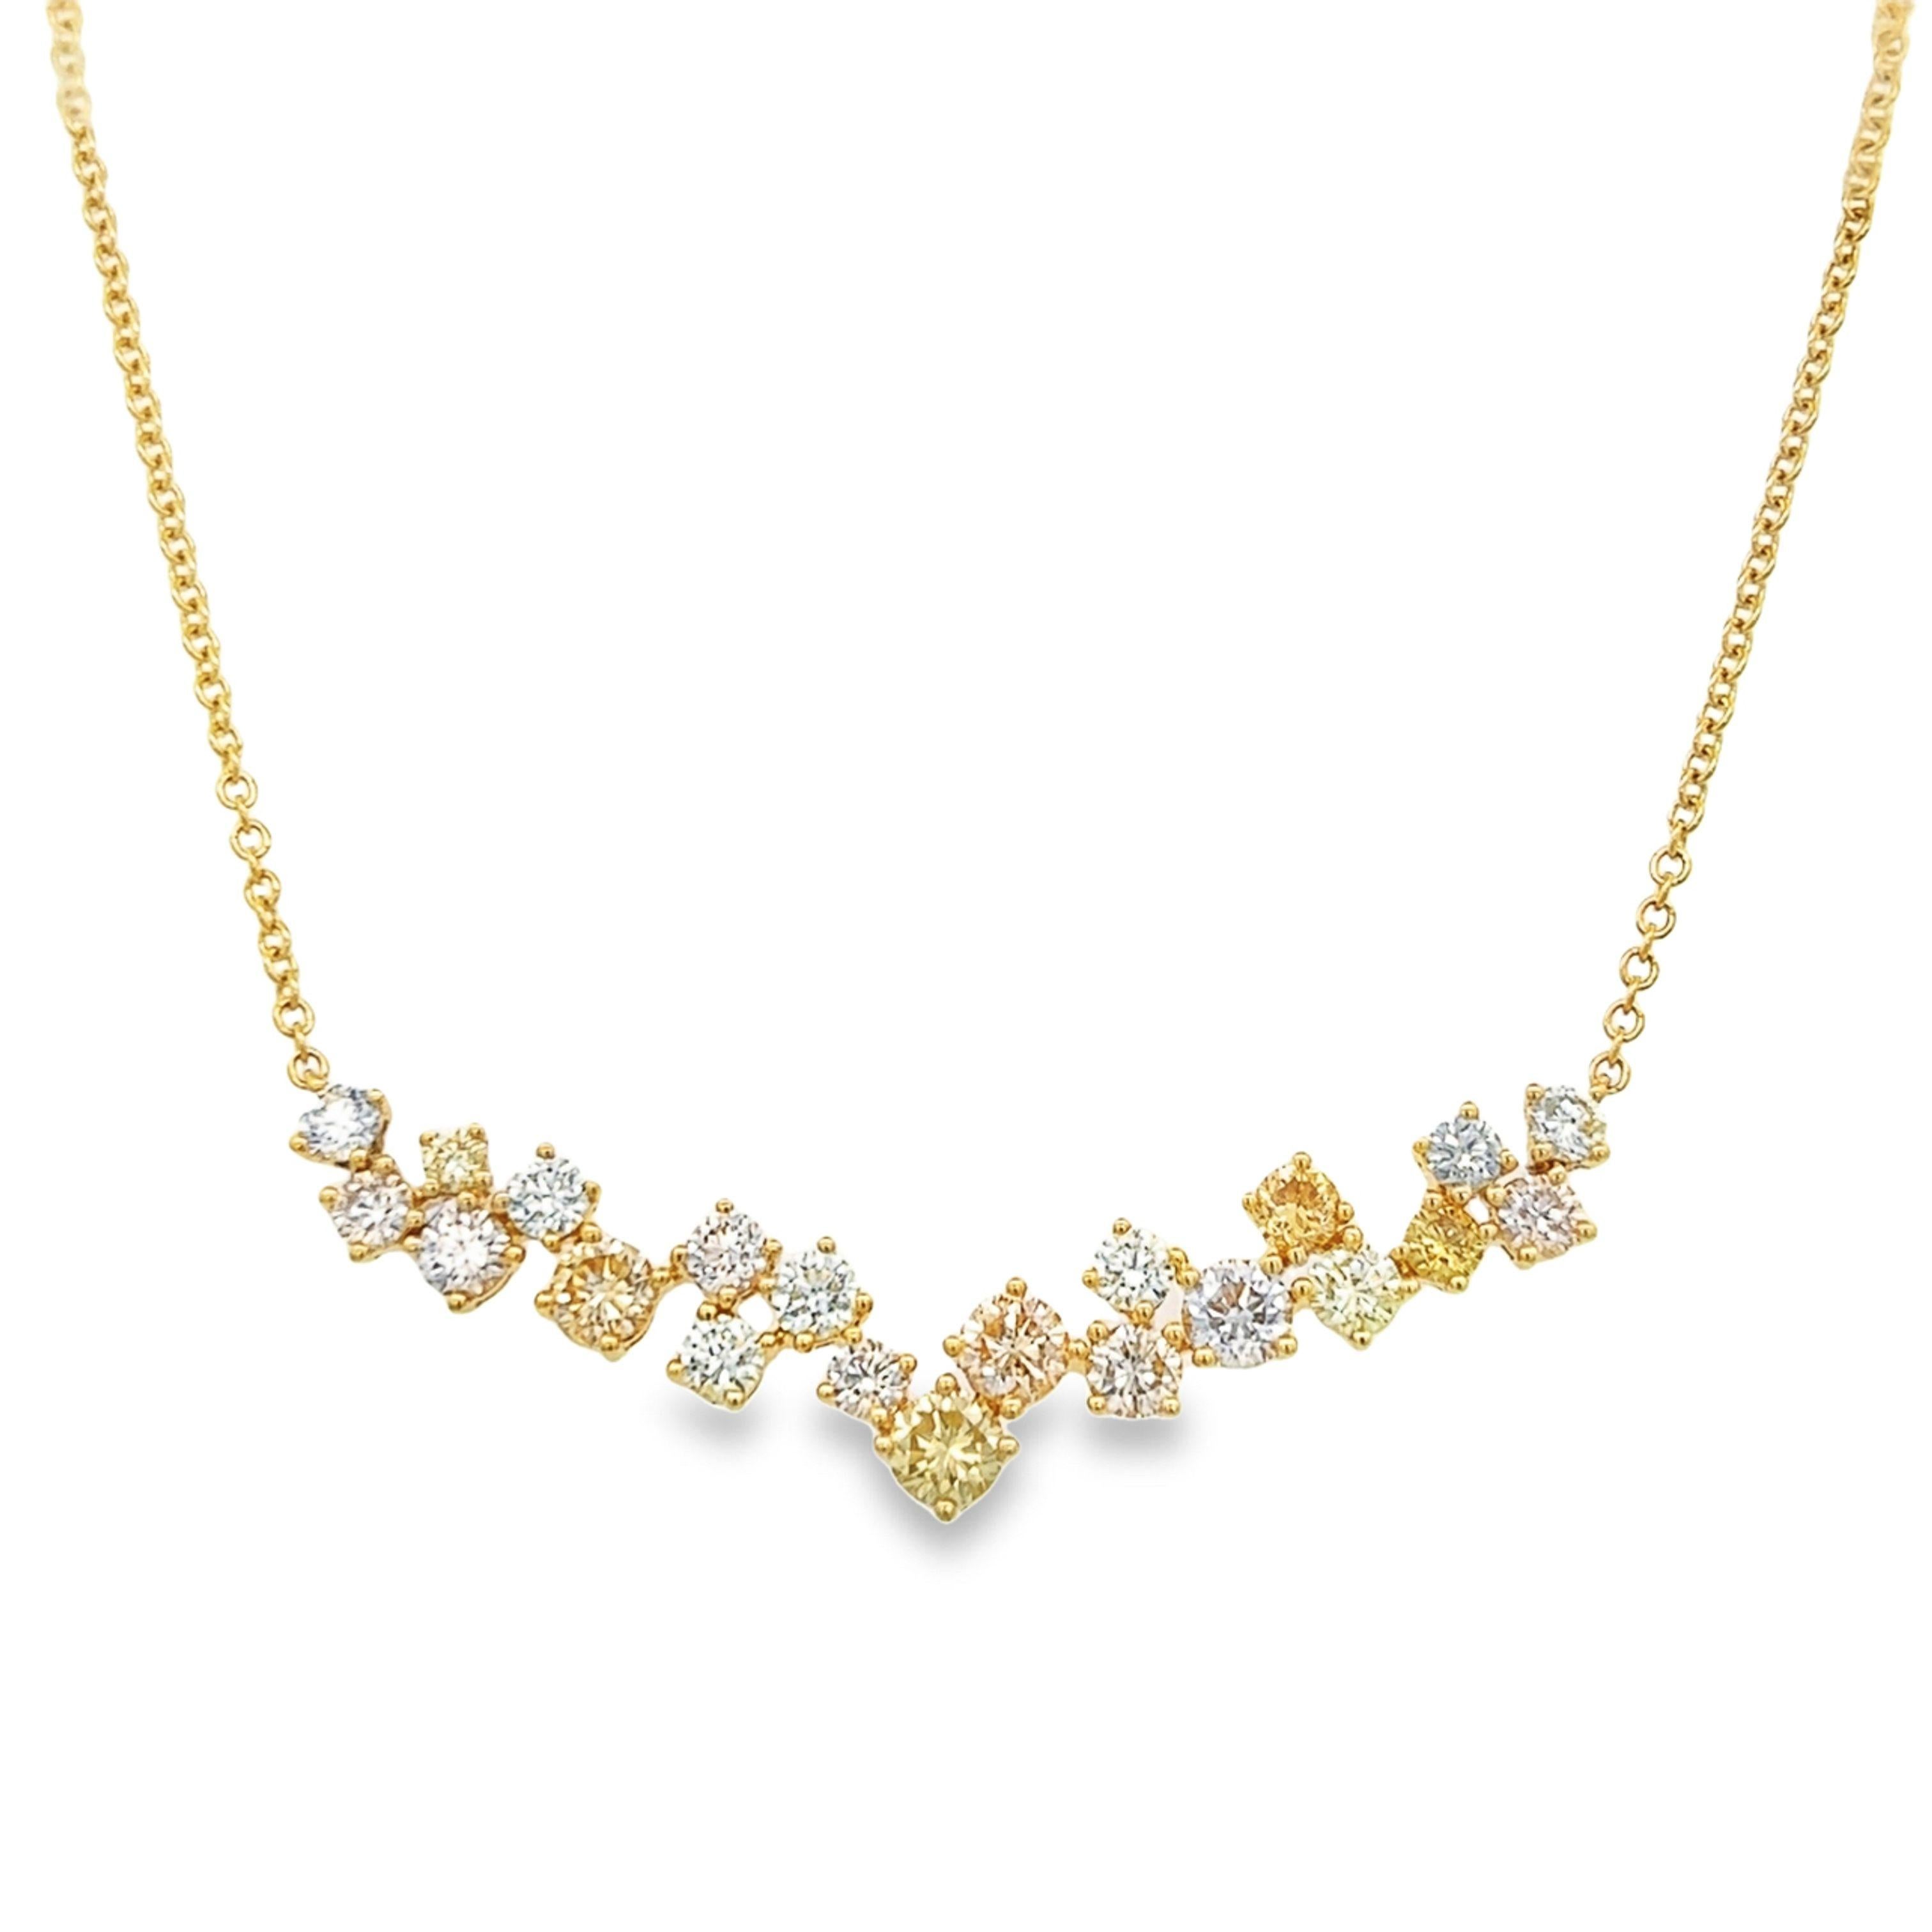 Contemporary Alexander Beverly Hills 4.56cat White & Yellow Diamond Pendant Necklace 18k For Sale